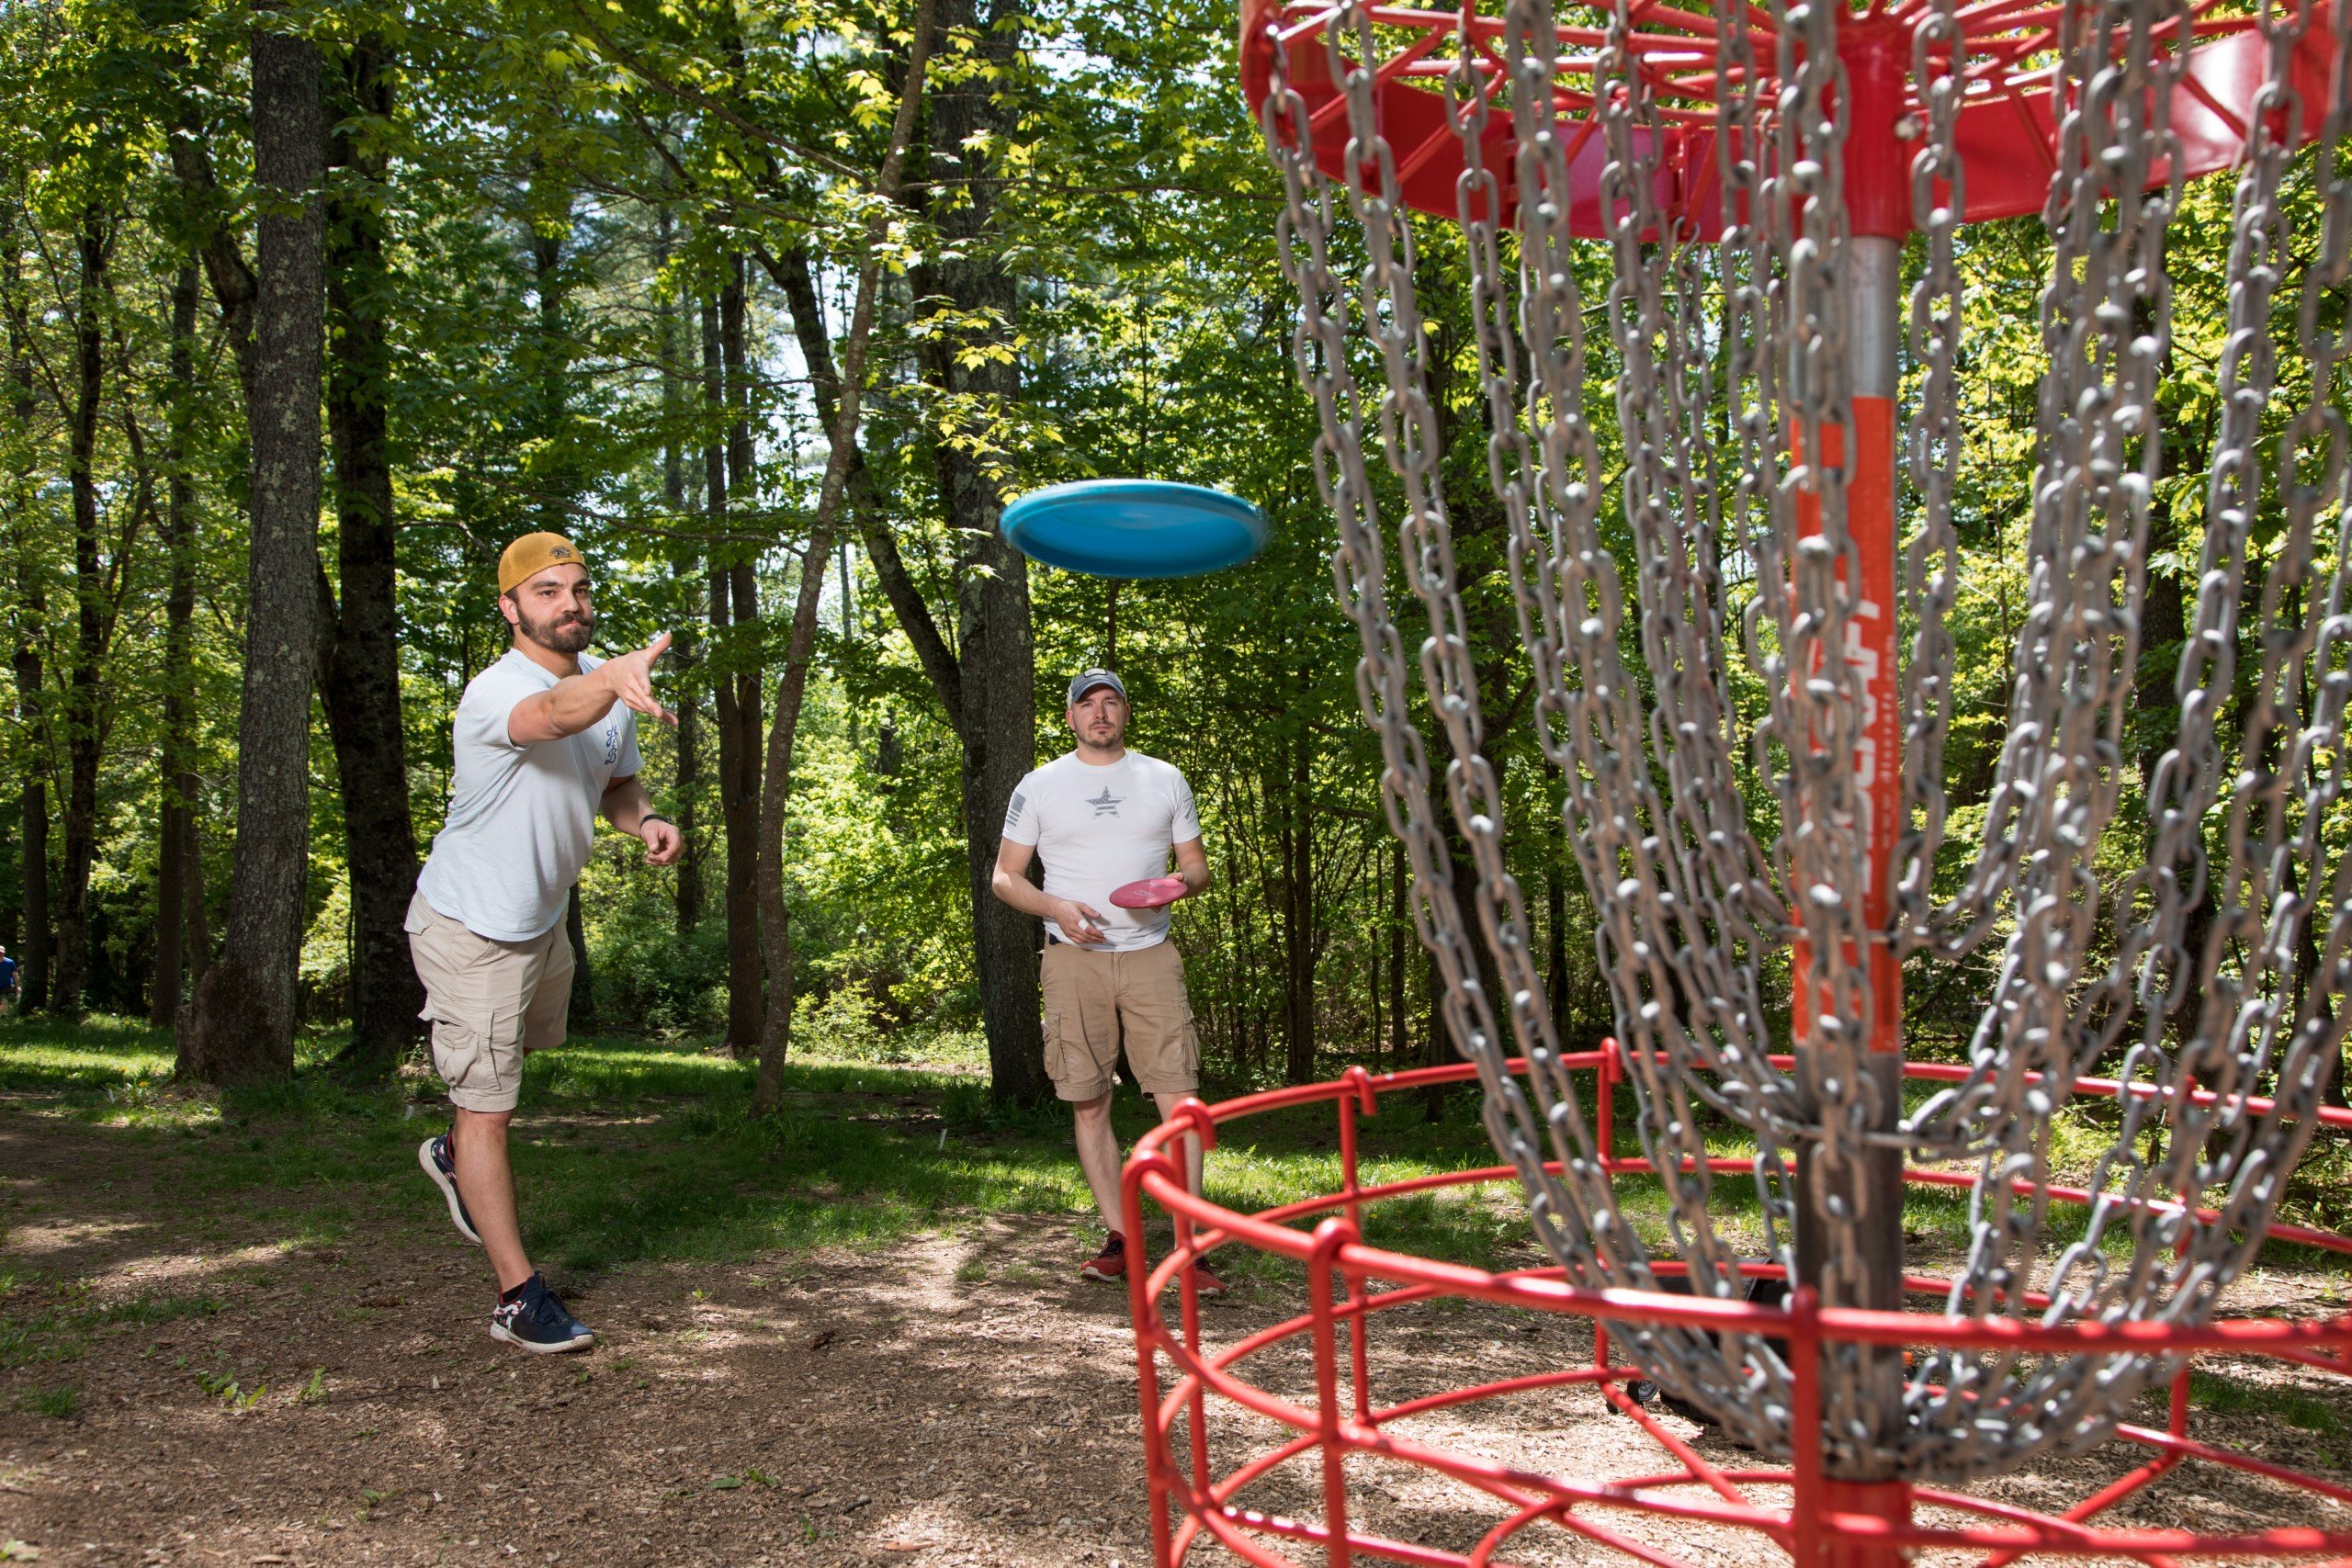 Learn to Play Disc Golf New Hampshire Magazine